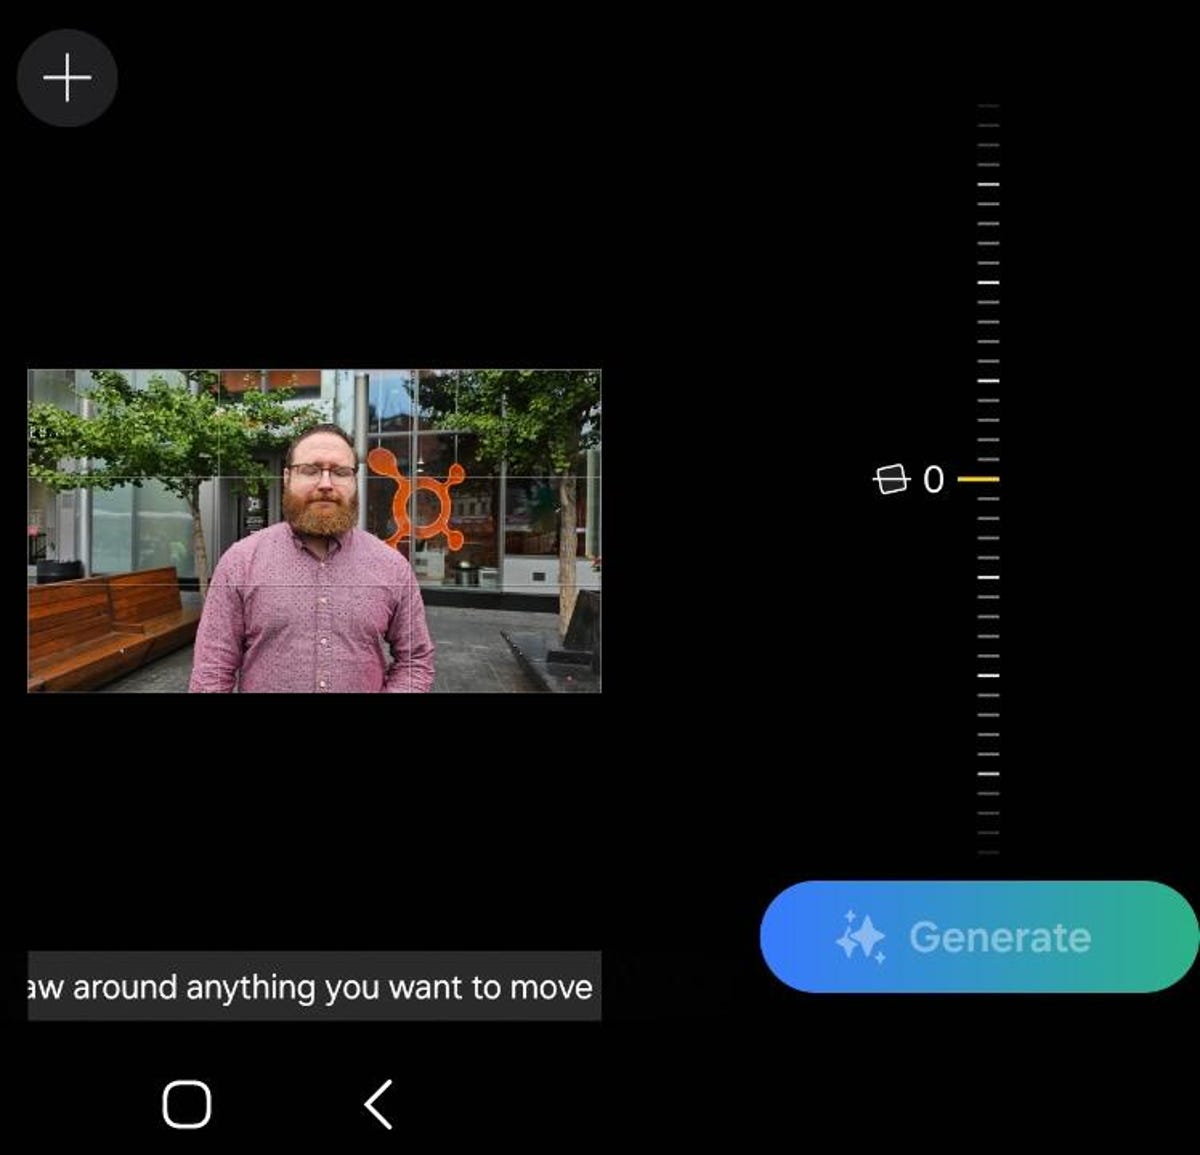 Samsung's photo editing interface showing a photo of a man with a beard